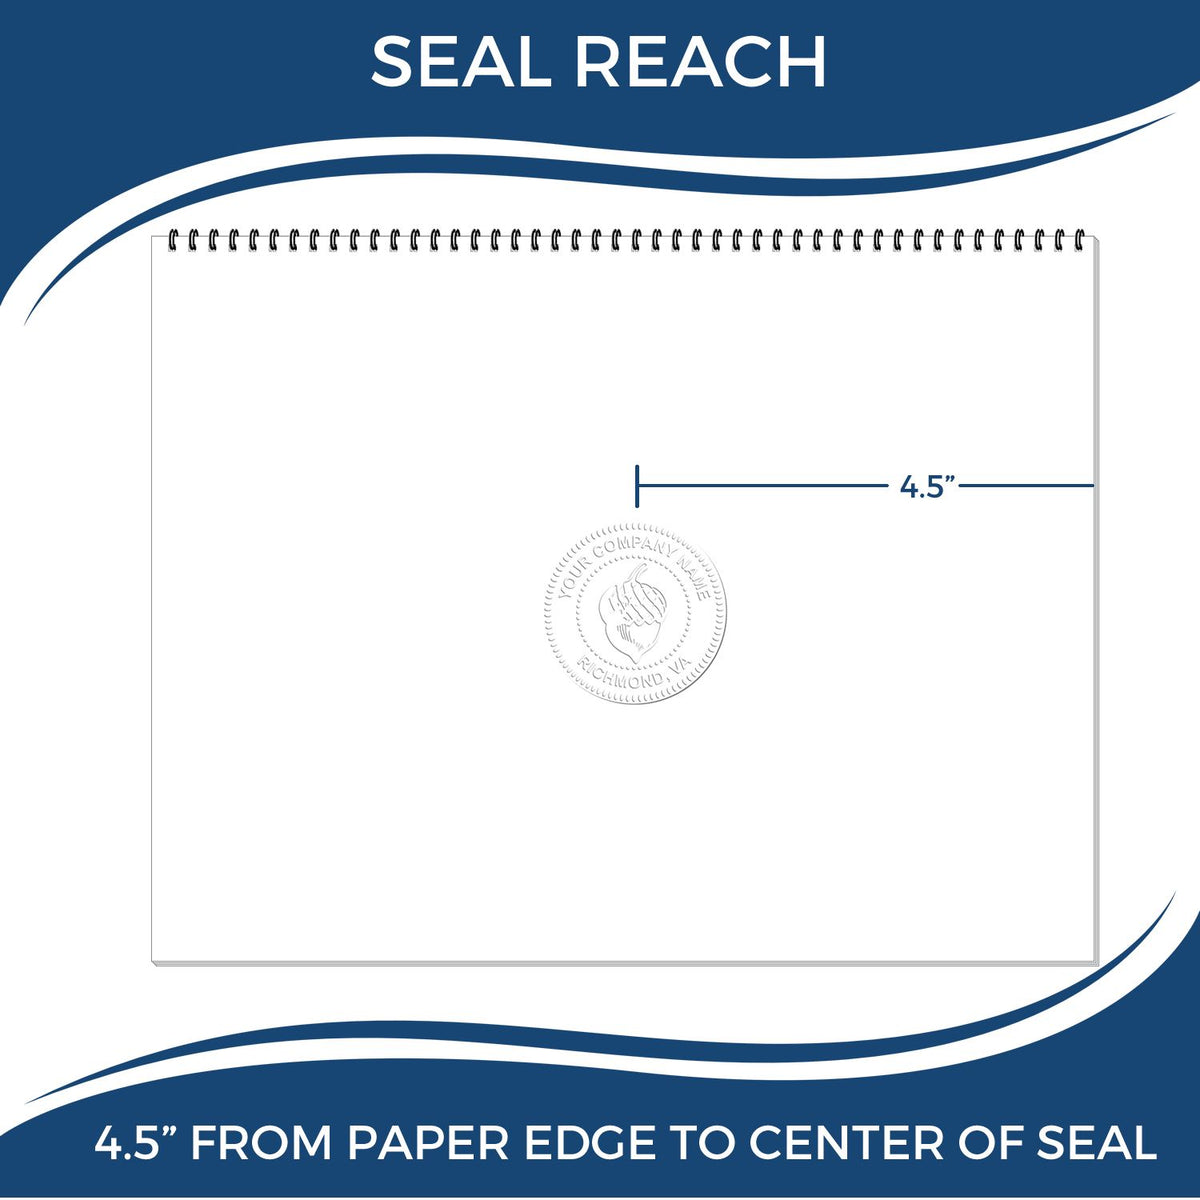 An infographic showing the seal reach which is represented by a ruler and a miniature seal image of the Extended Long Reach Connecticut Surveyor Embosser